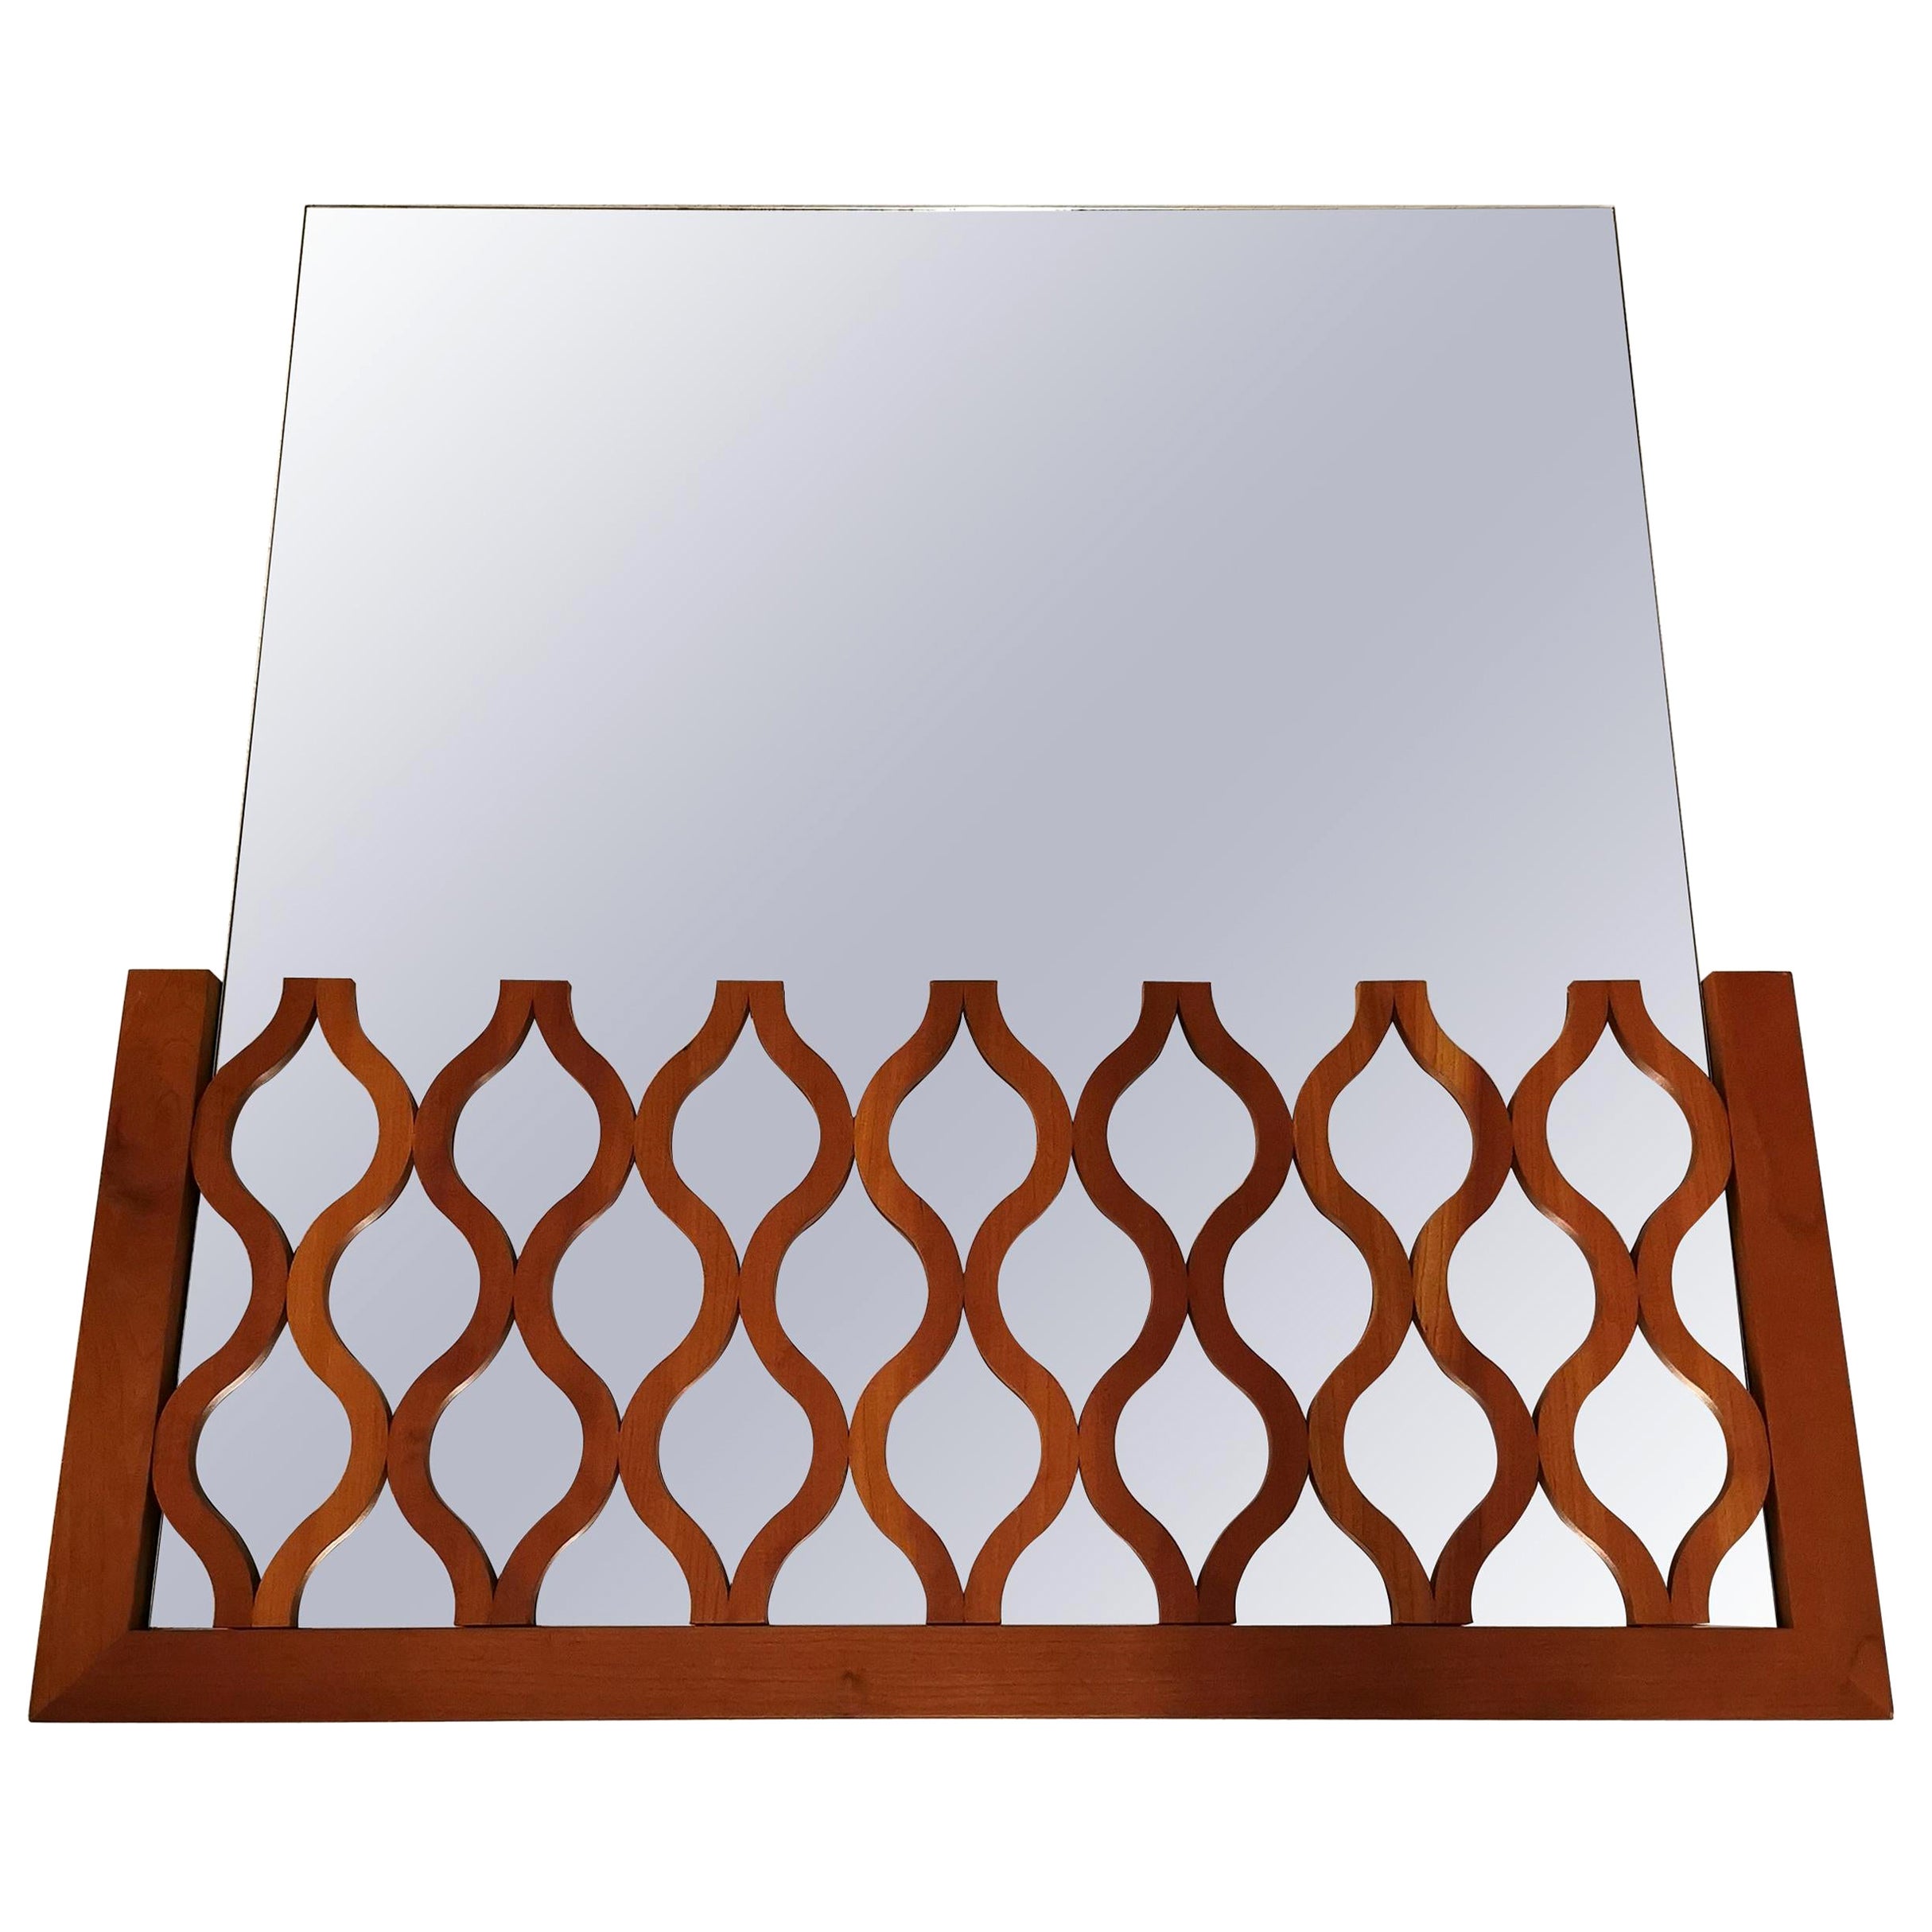 Particular modern mirror design by Calligaris, in cherrywood with grill accessory, made in Italy in the 90s.



Note: We try to offer our customers an excellent service even in shipments all over the world, collaborating with one of the best